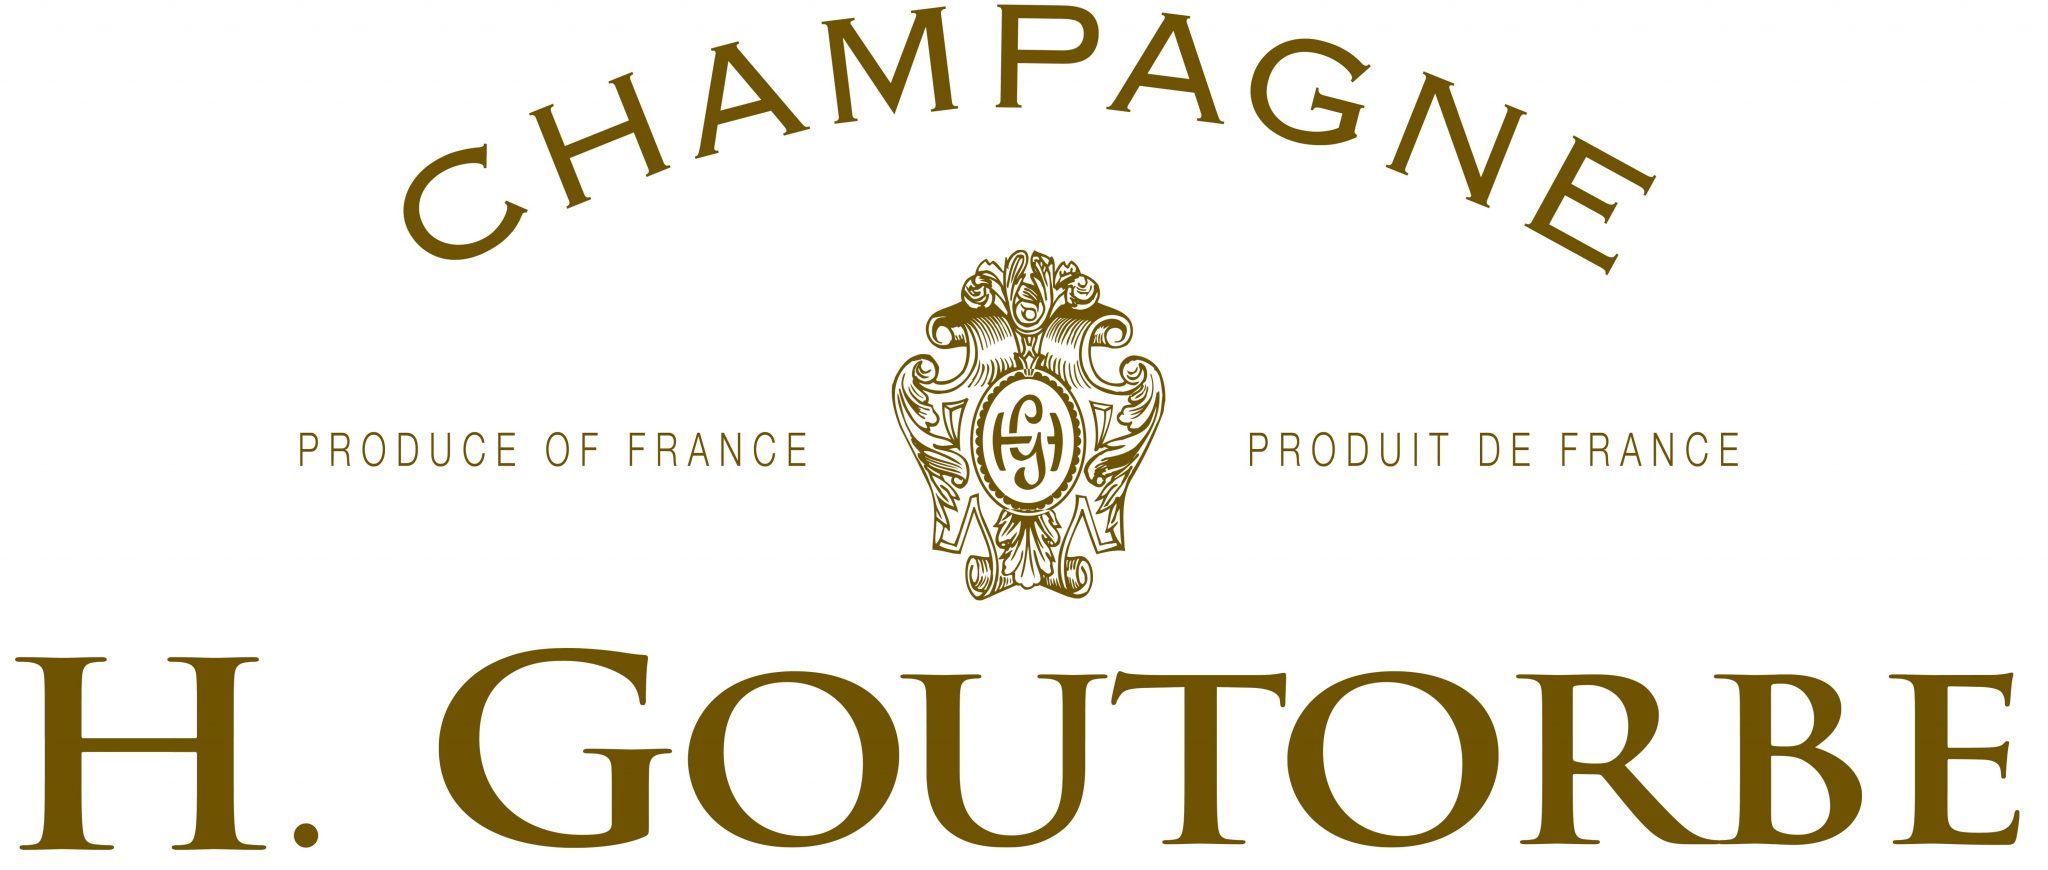 Champagne H. Goutorbe